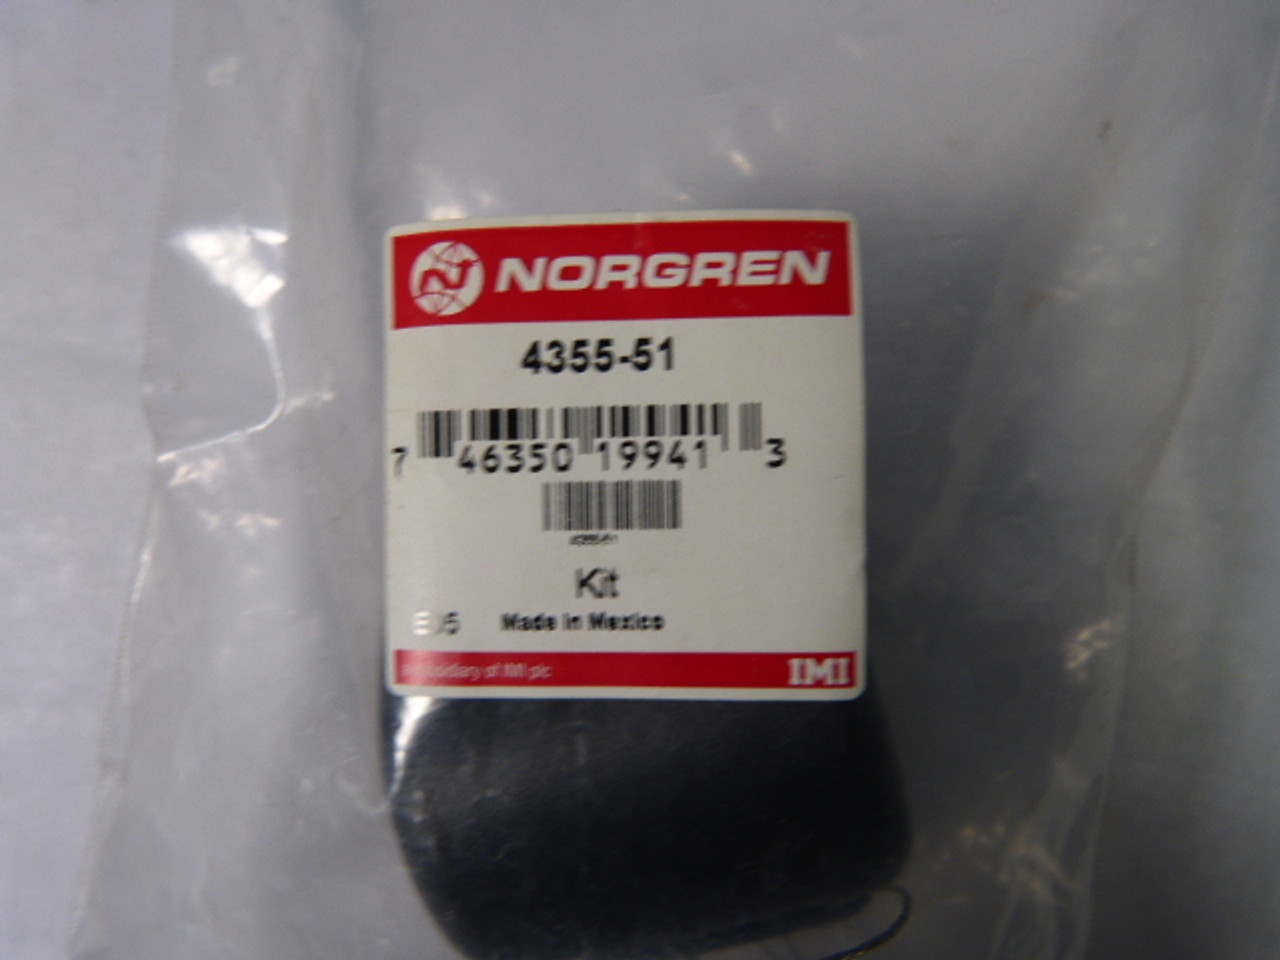 Norgren 4355-51 Tamper-Resistant Cover & Wire Set ! NWB !